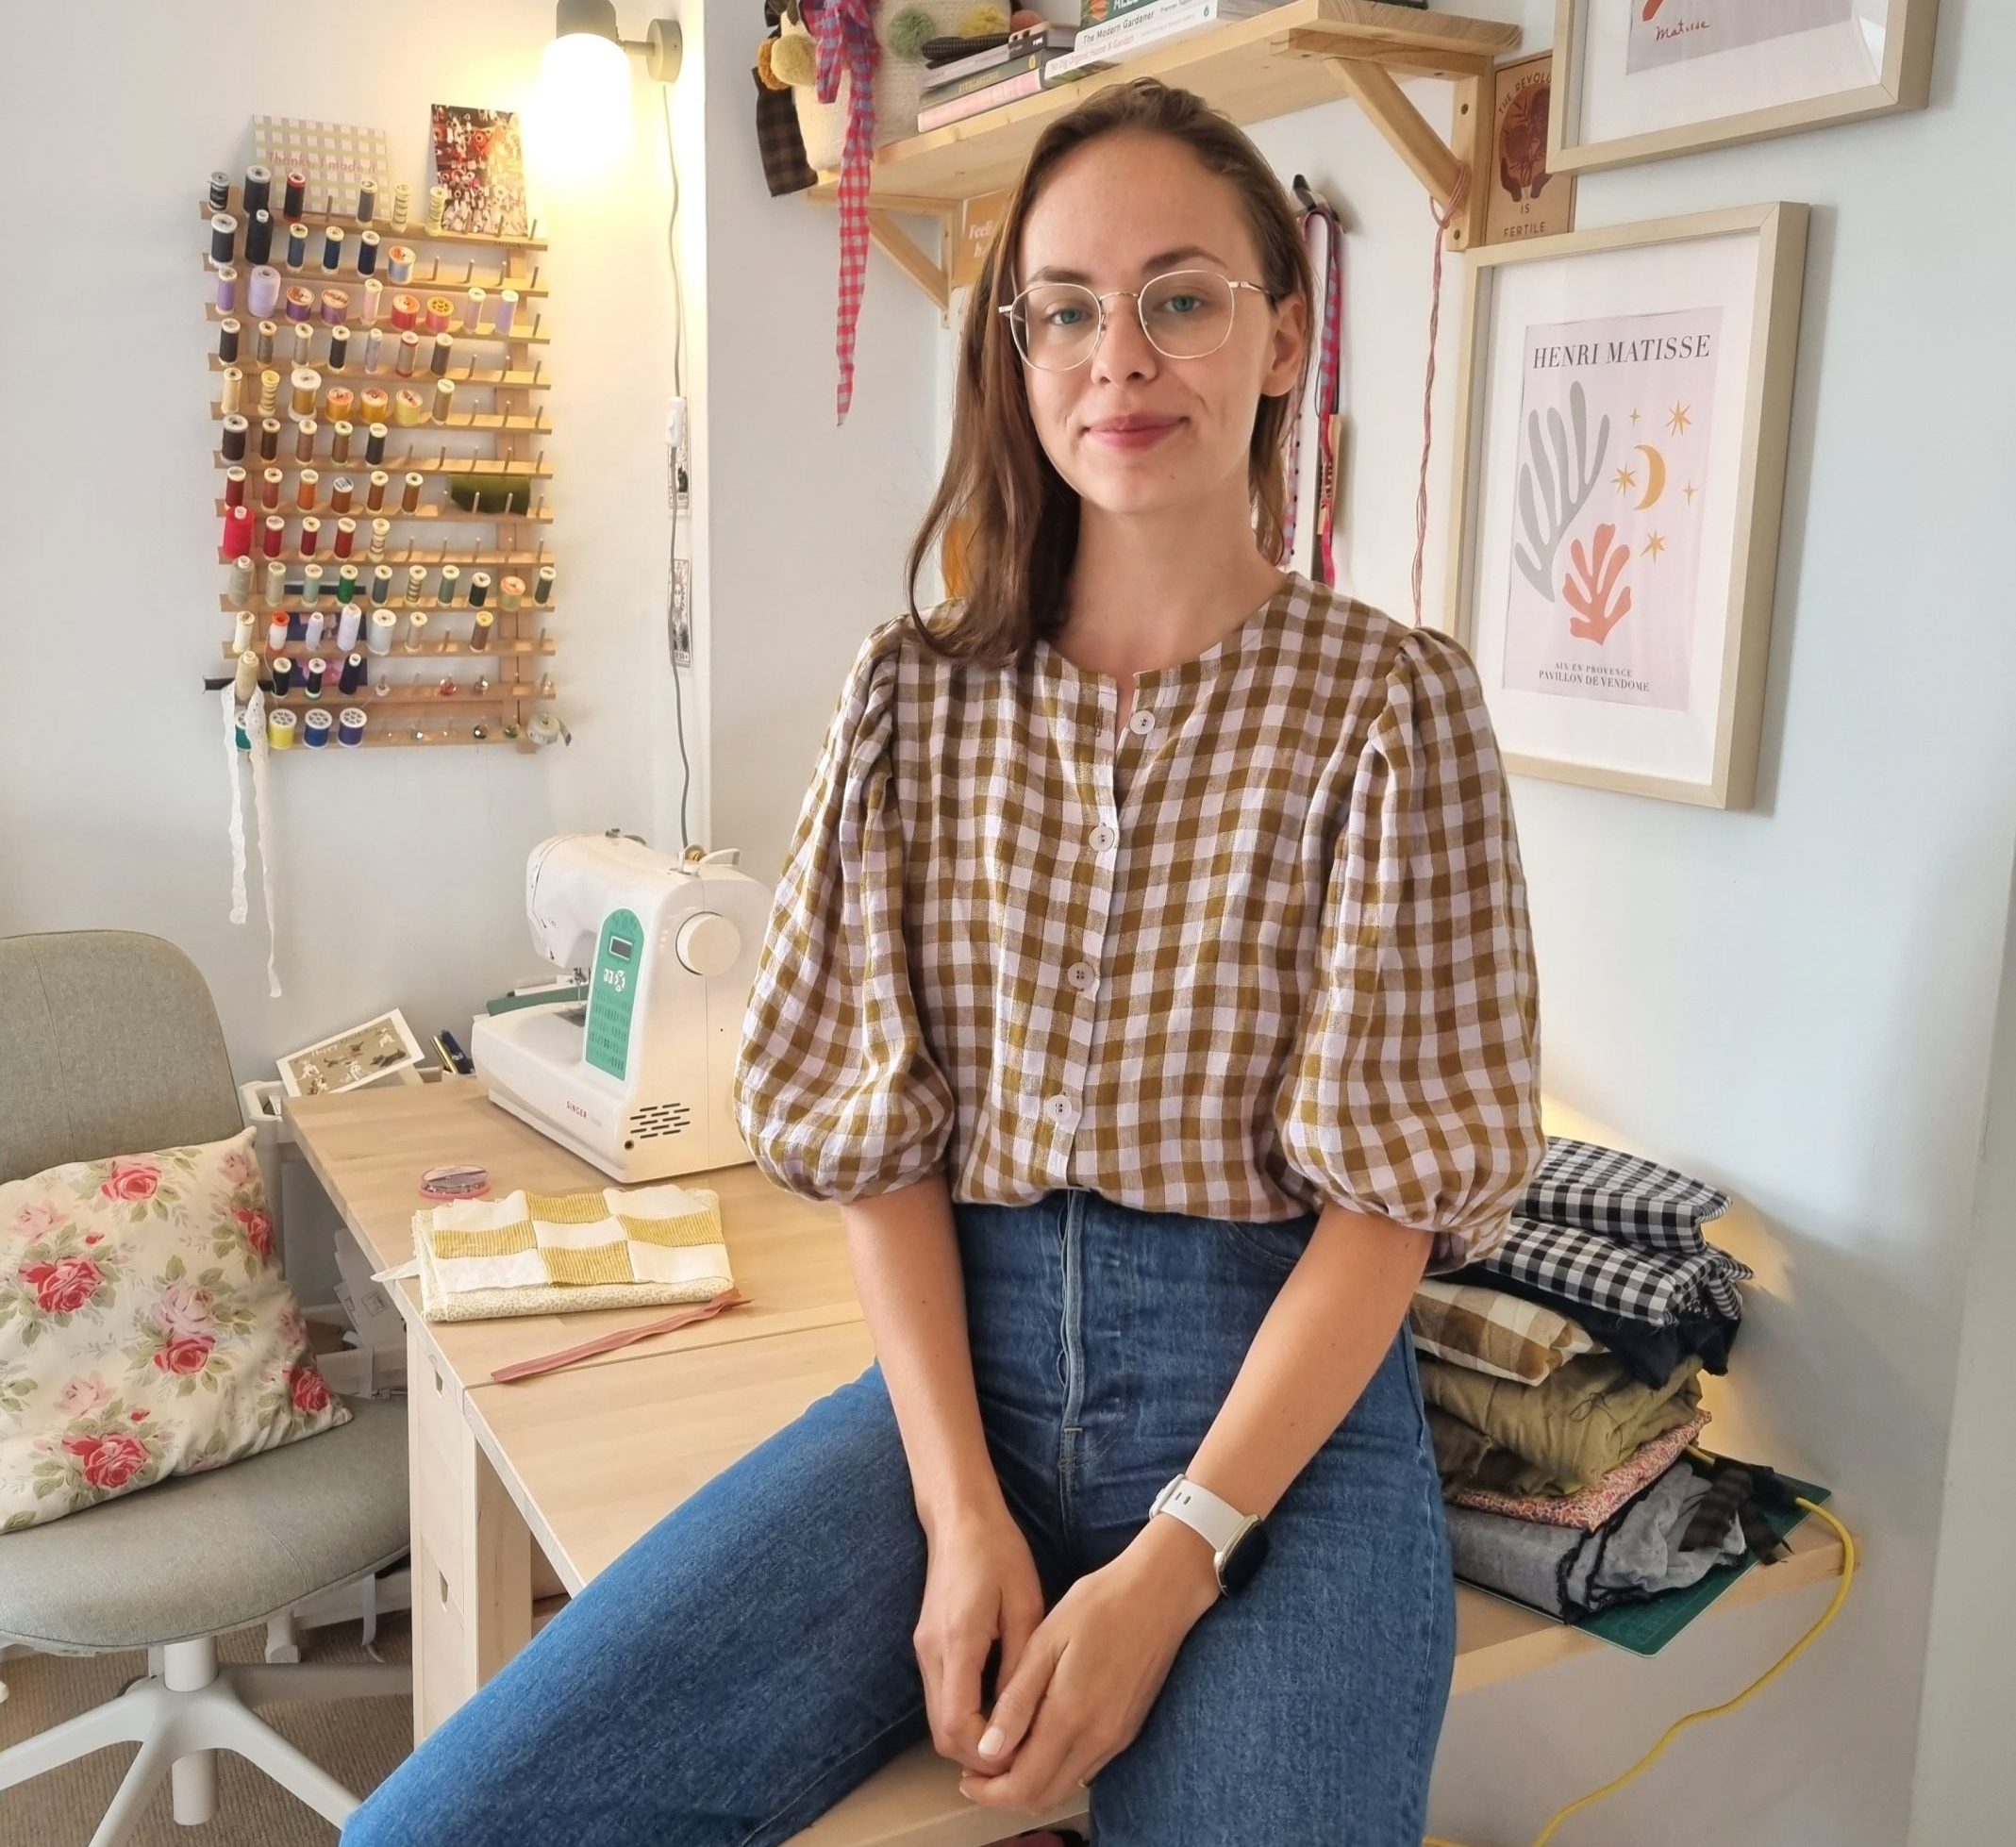 William Gee Studio: Welcome to our new online sewing space